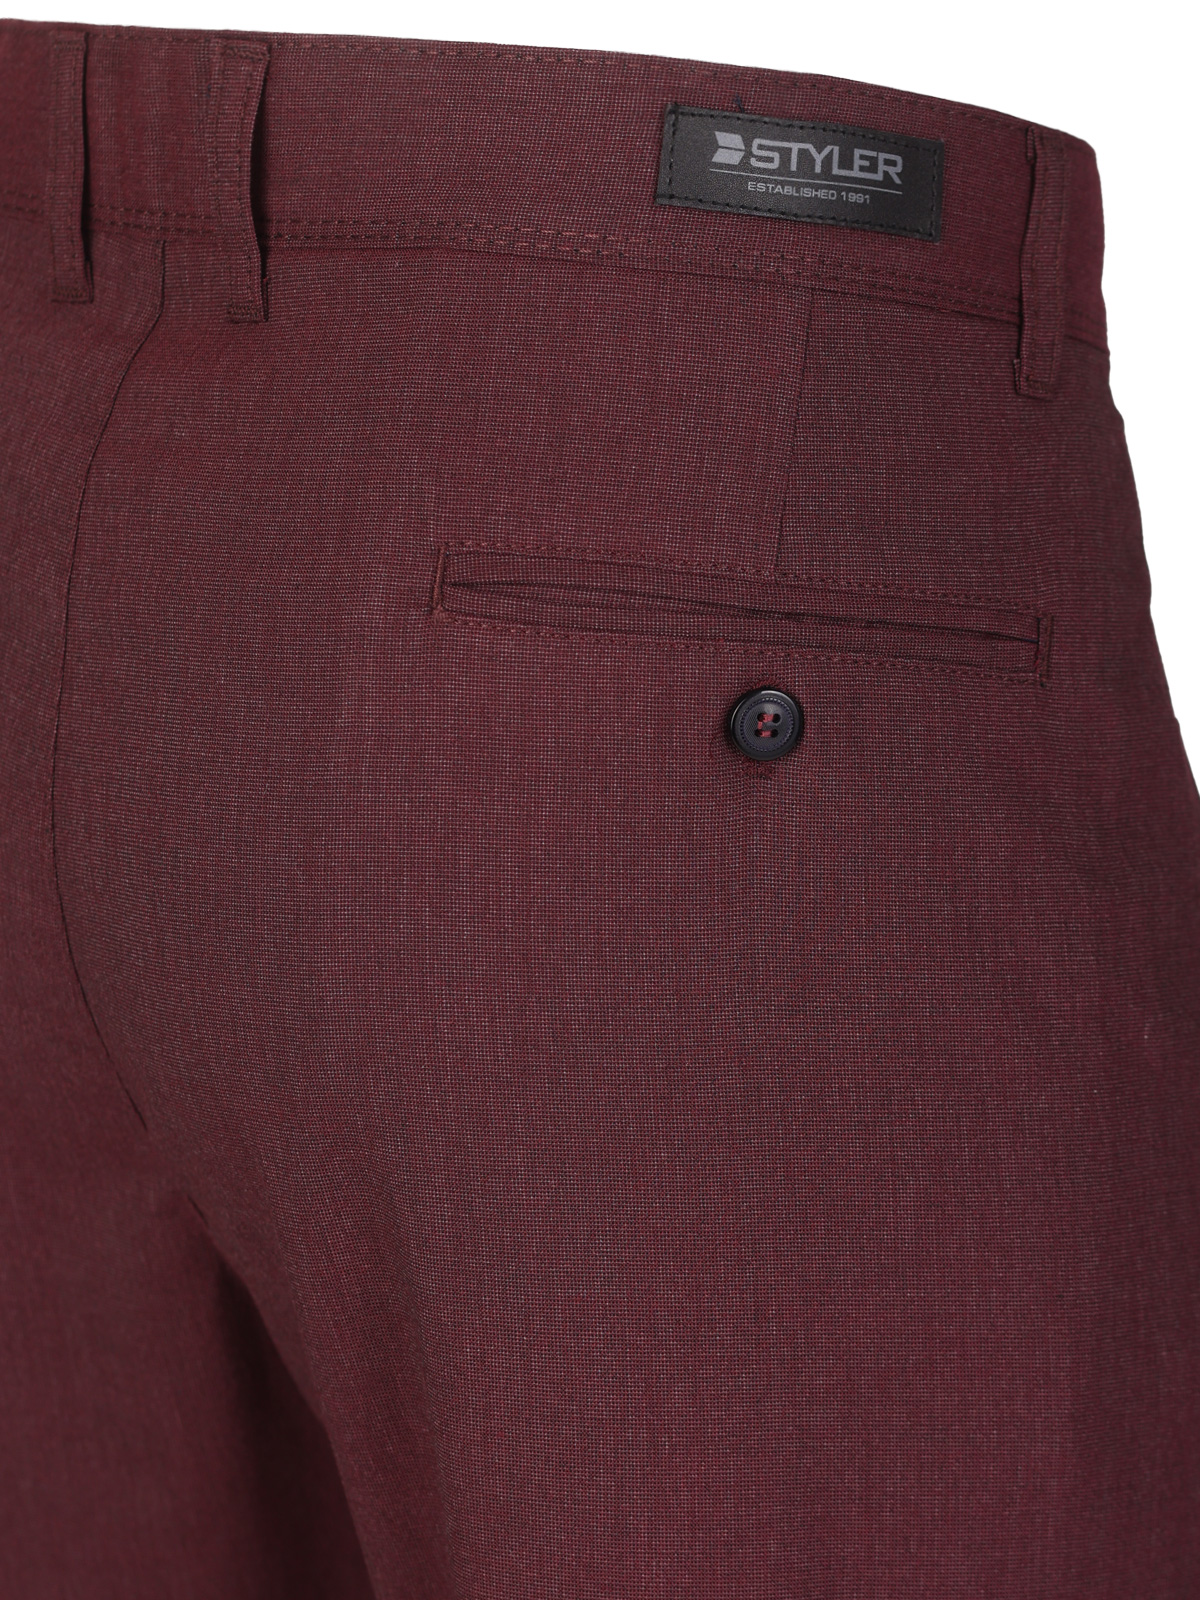 Fitted burgundy melange trousers - 60312 € 66.37 img3